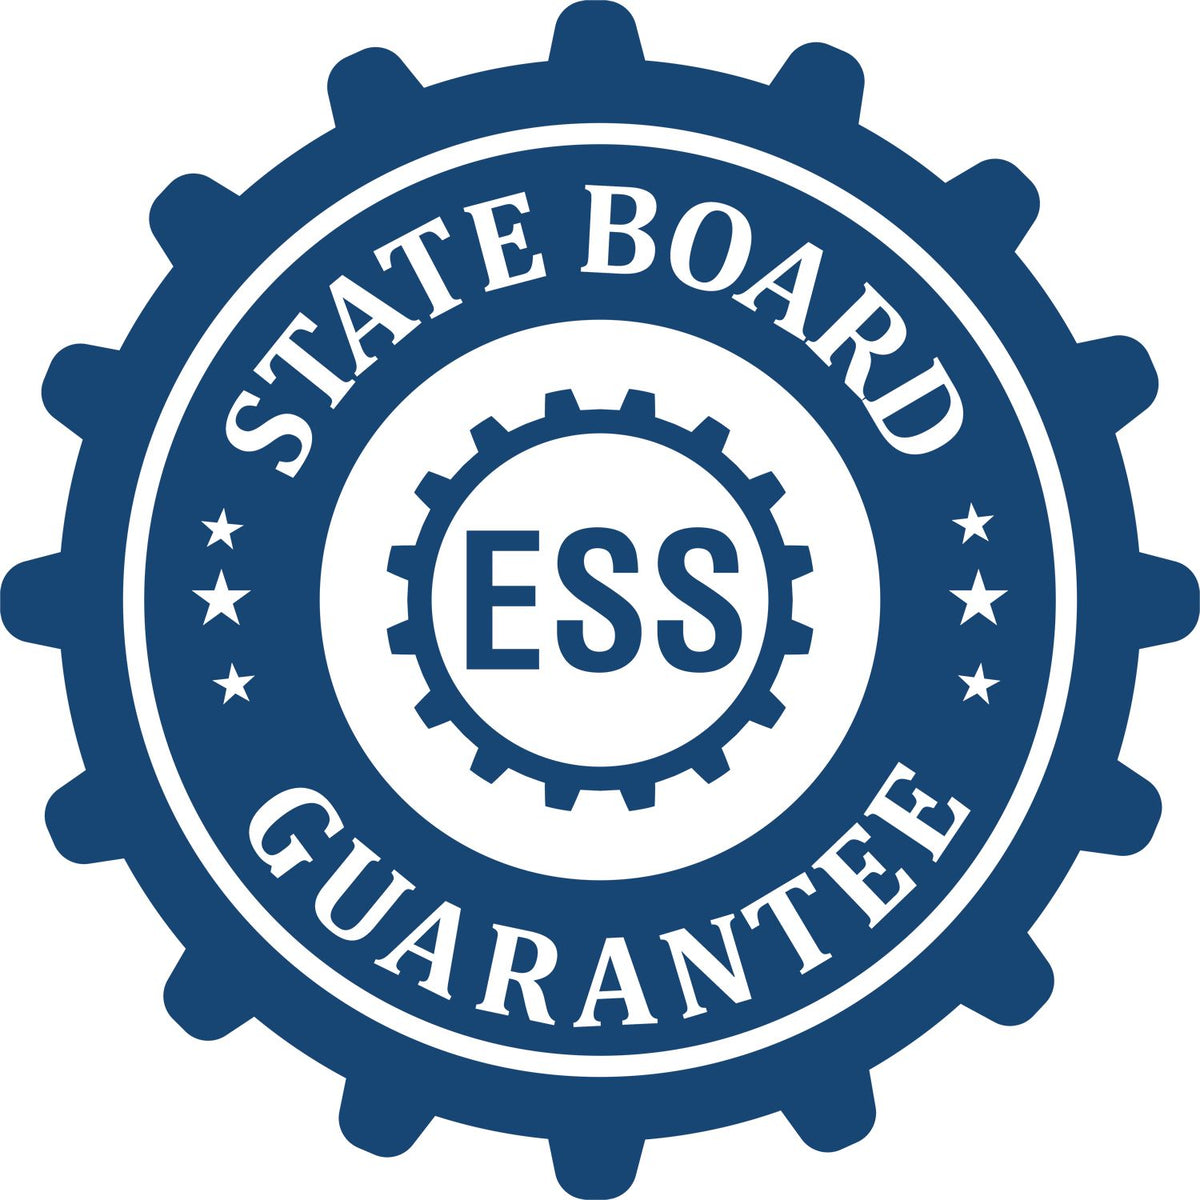 An emblem in a gear shape illustrating a state board guarantee for the State of New York Long Reach Architectural Embossing Seal product.